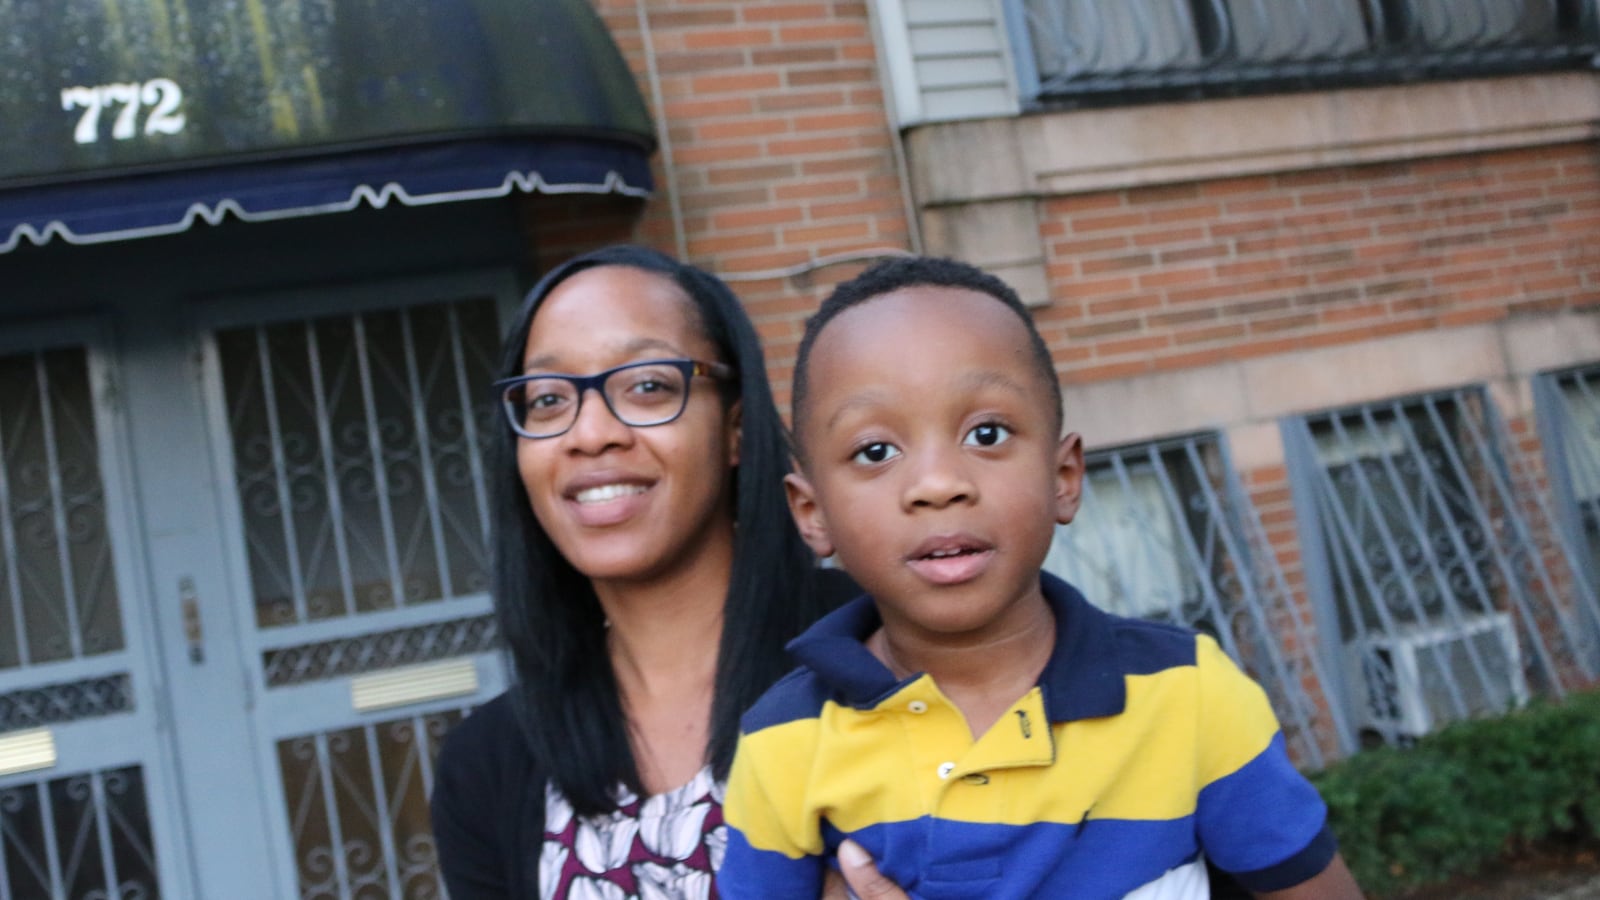 Shavon Gilliam with her son, Mikel, outside their Bronx home.